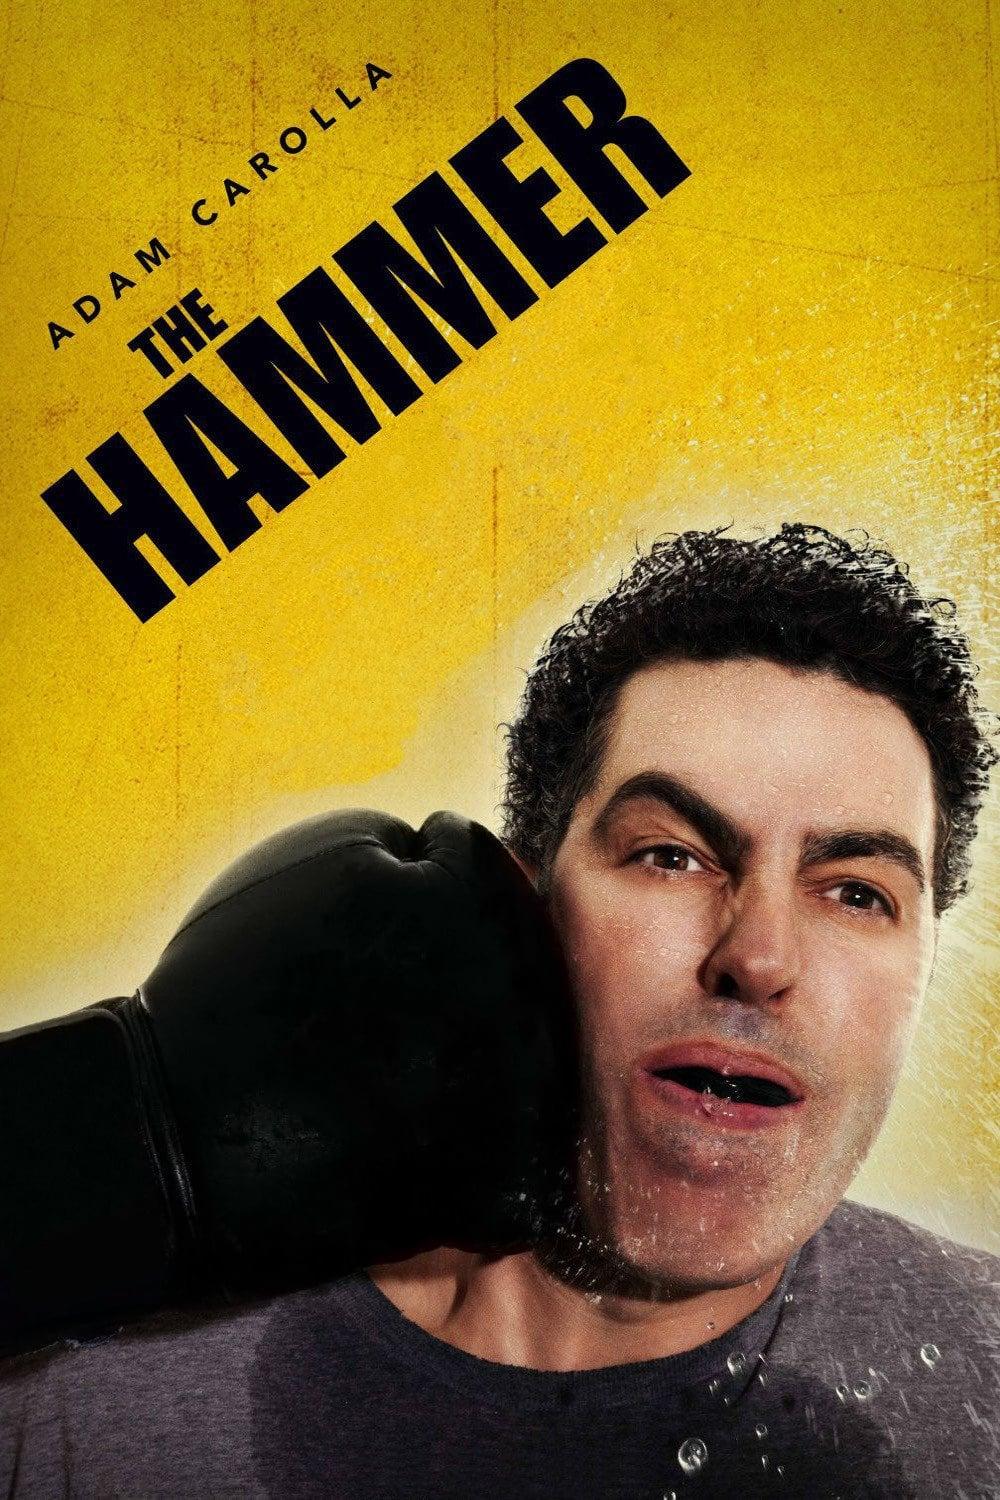 The Hammer poster